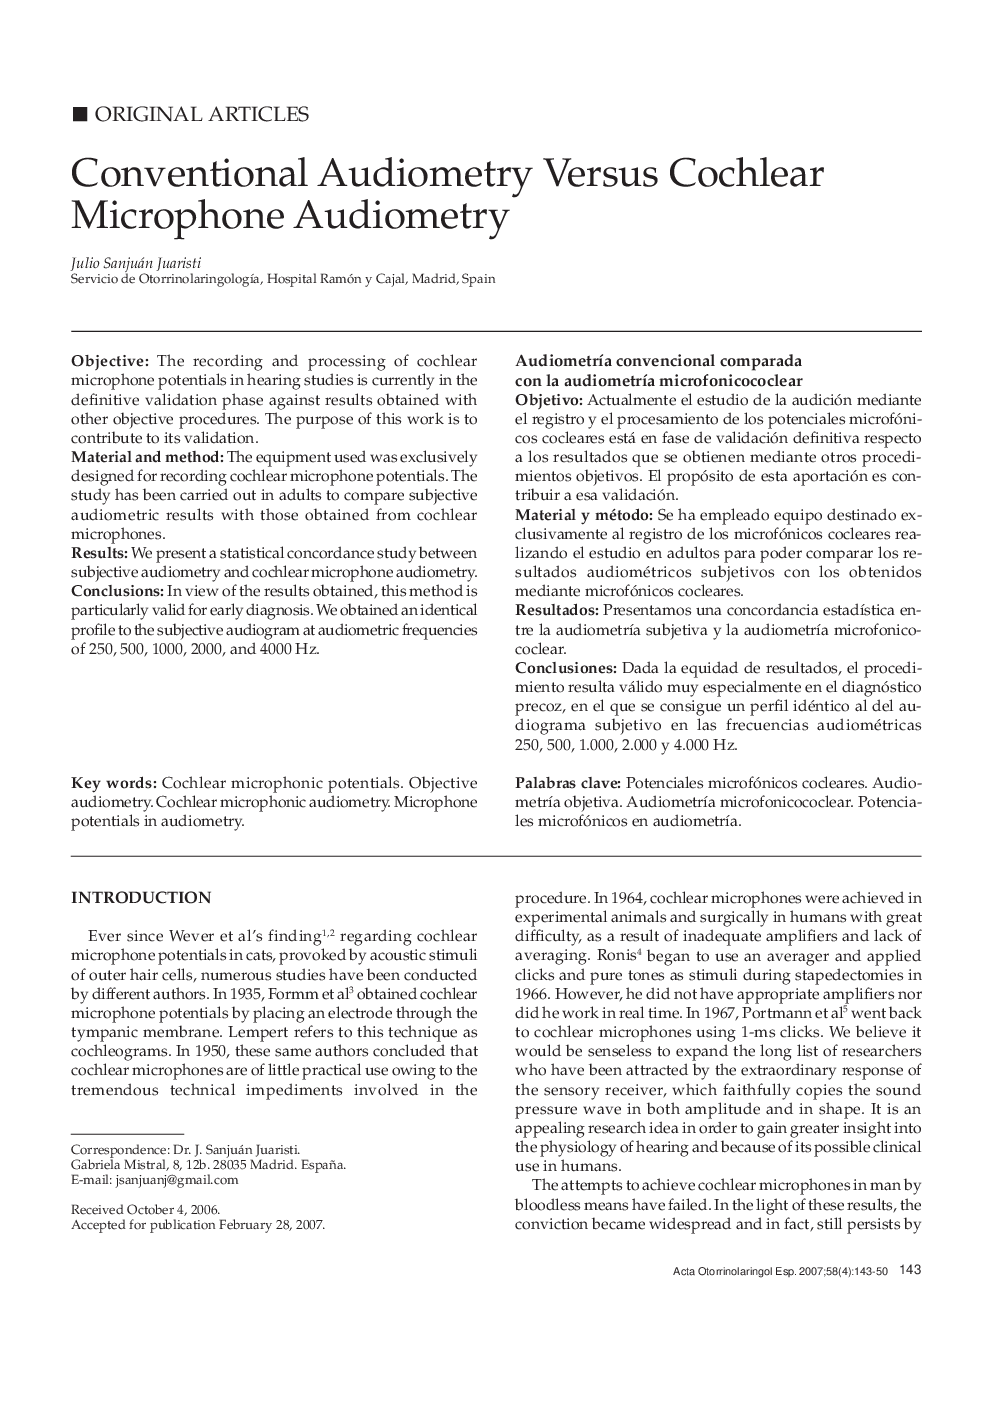 Conventional Audiometry Versus Cochlear Microphone Audiometry